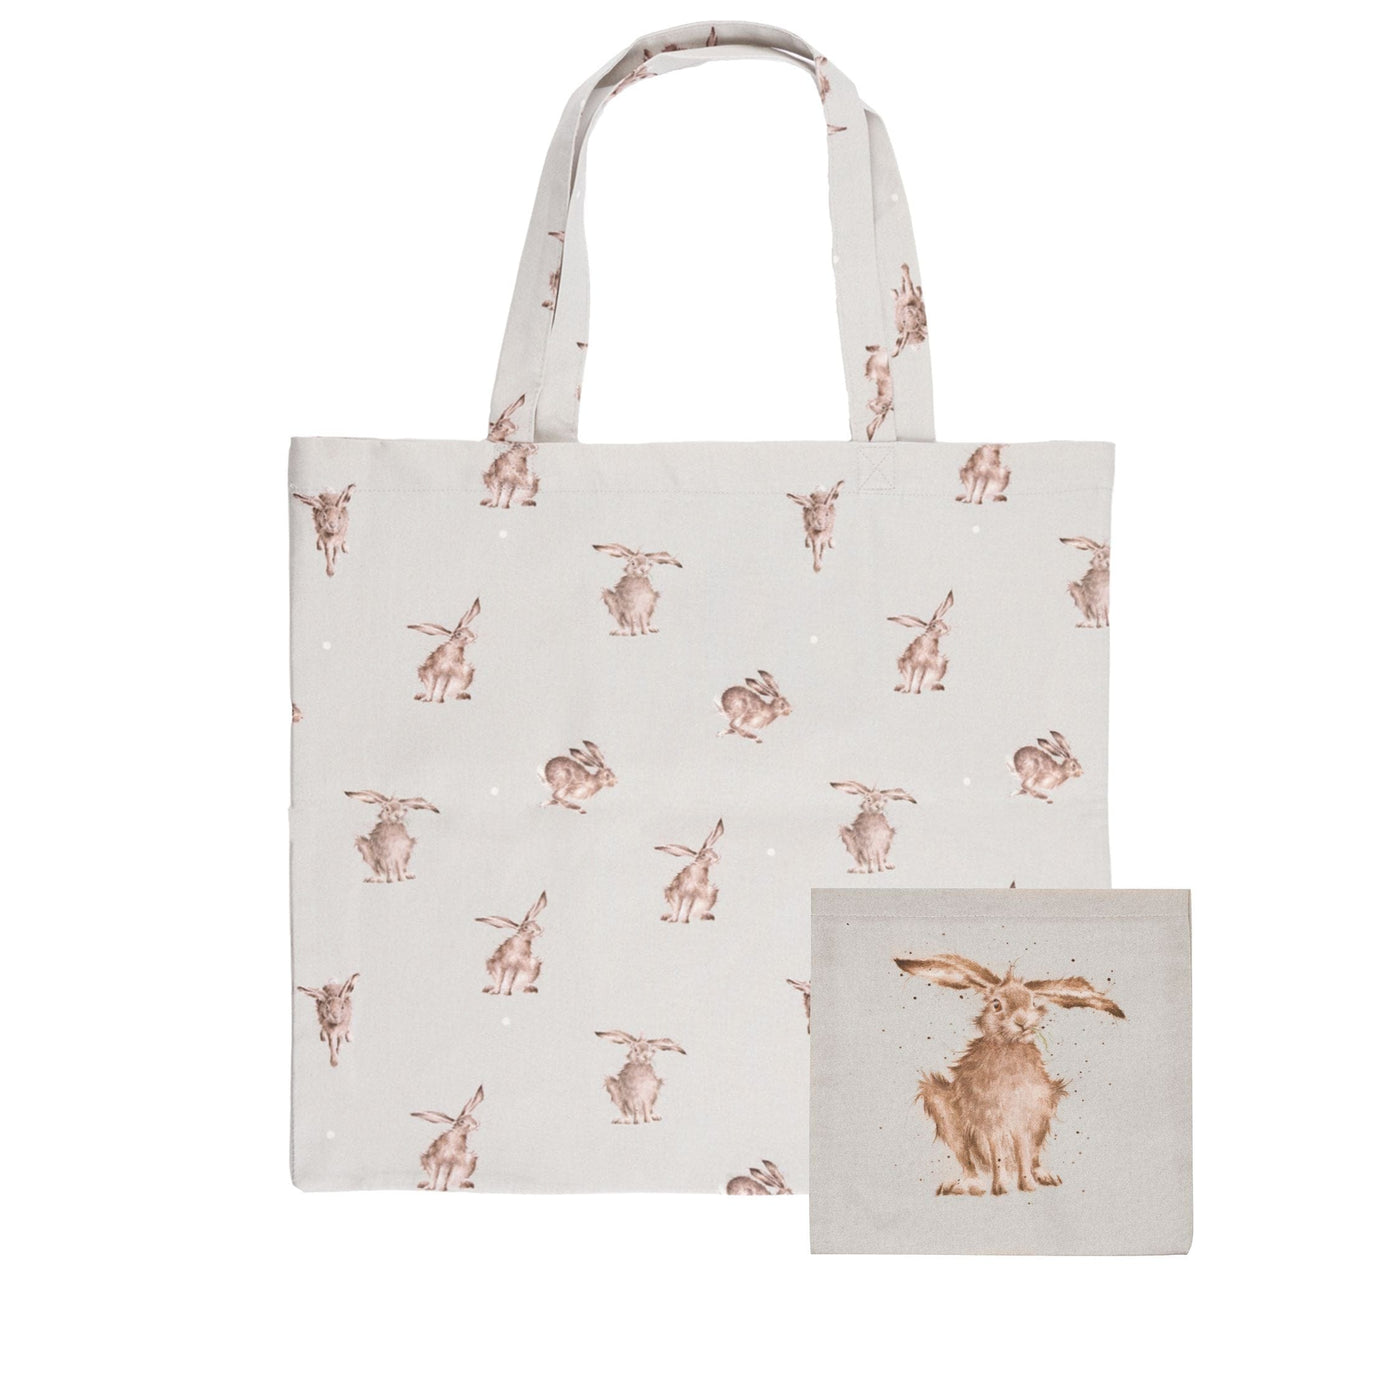 Wrendale Designs Bags Hare Choice of Design Foldable Shopping Bag